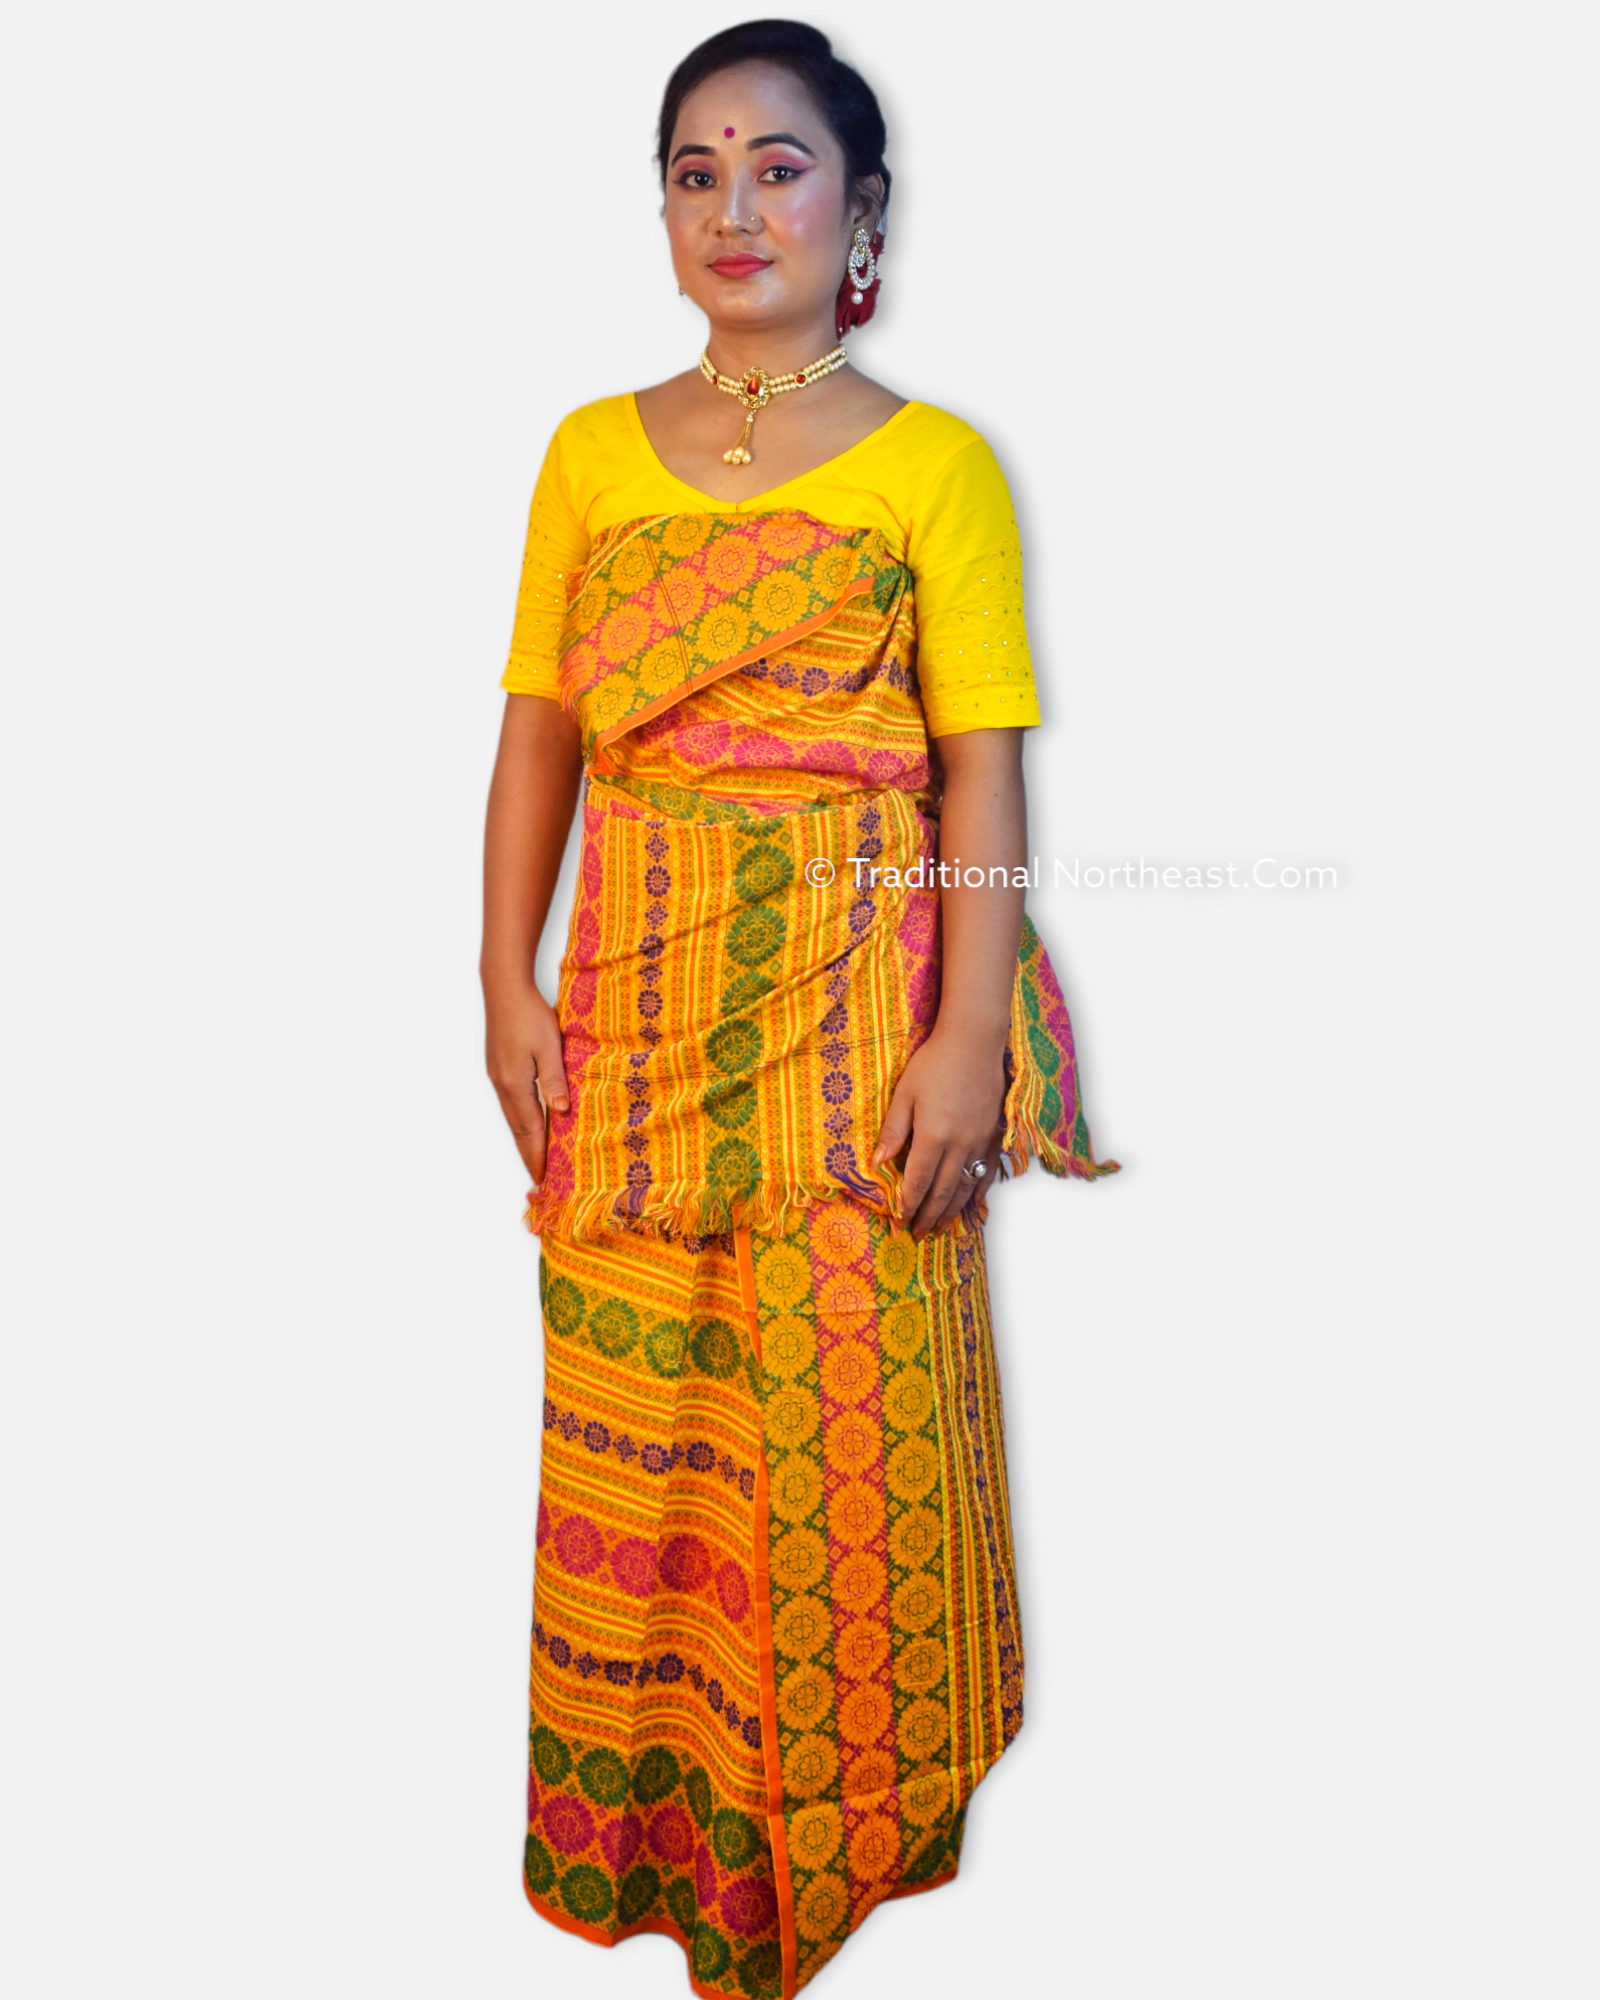 Tiprasa People #Debbarma Traditional #Dress #Indigenous of #Indian  #Subcontinent | India traditional dress, Traditional outfits, Korean girl  fashion